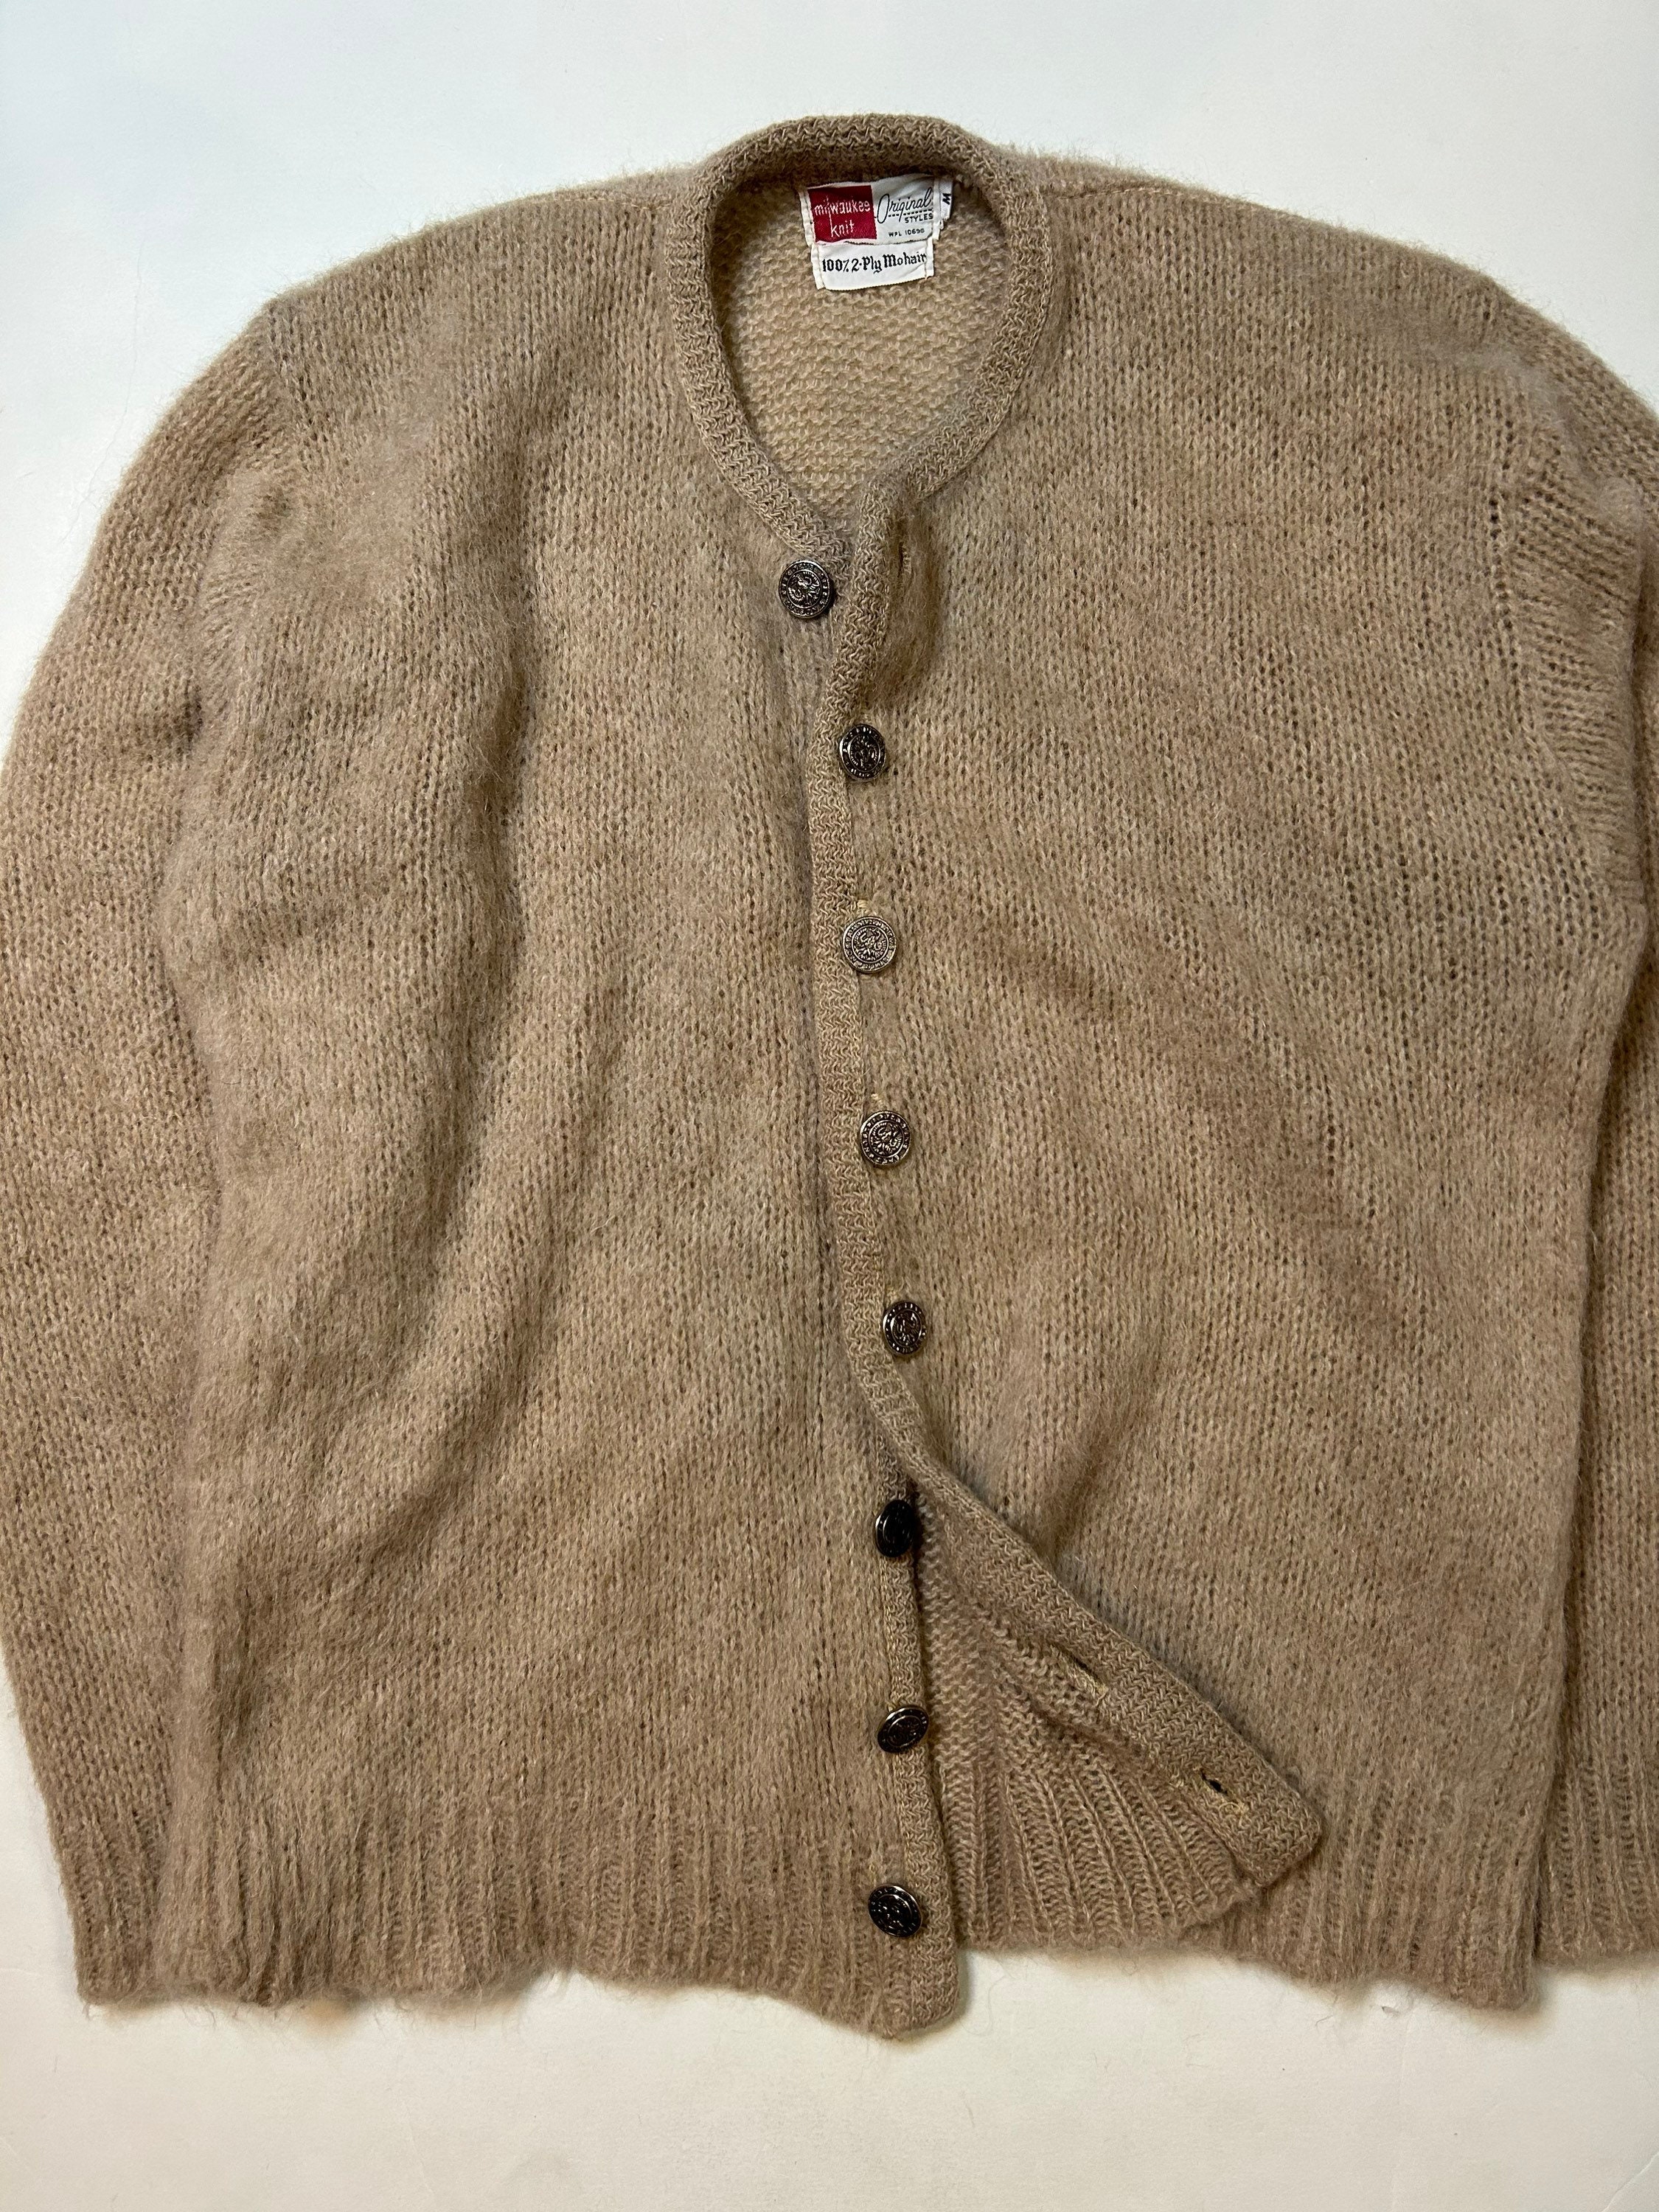 Vintage 1960s Mohair Cardigan Sweater Mens Size S/M Milwaukee 